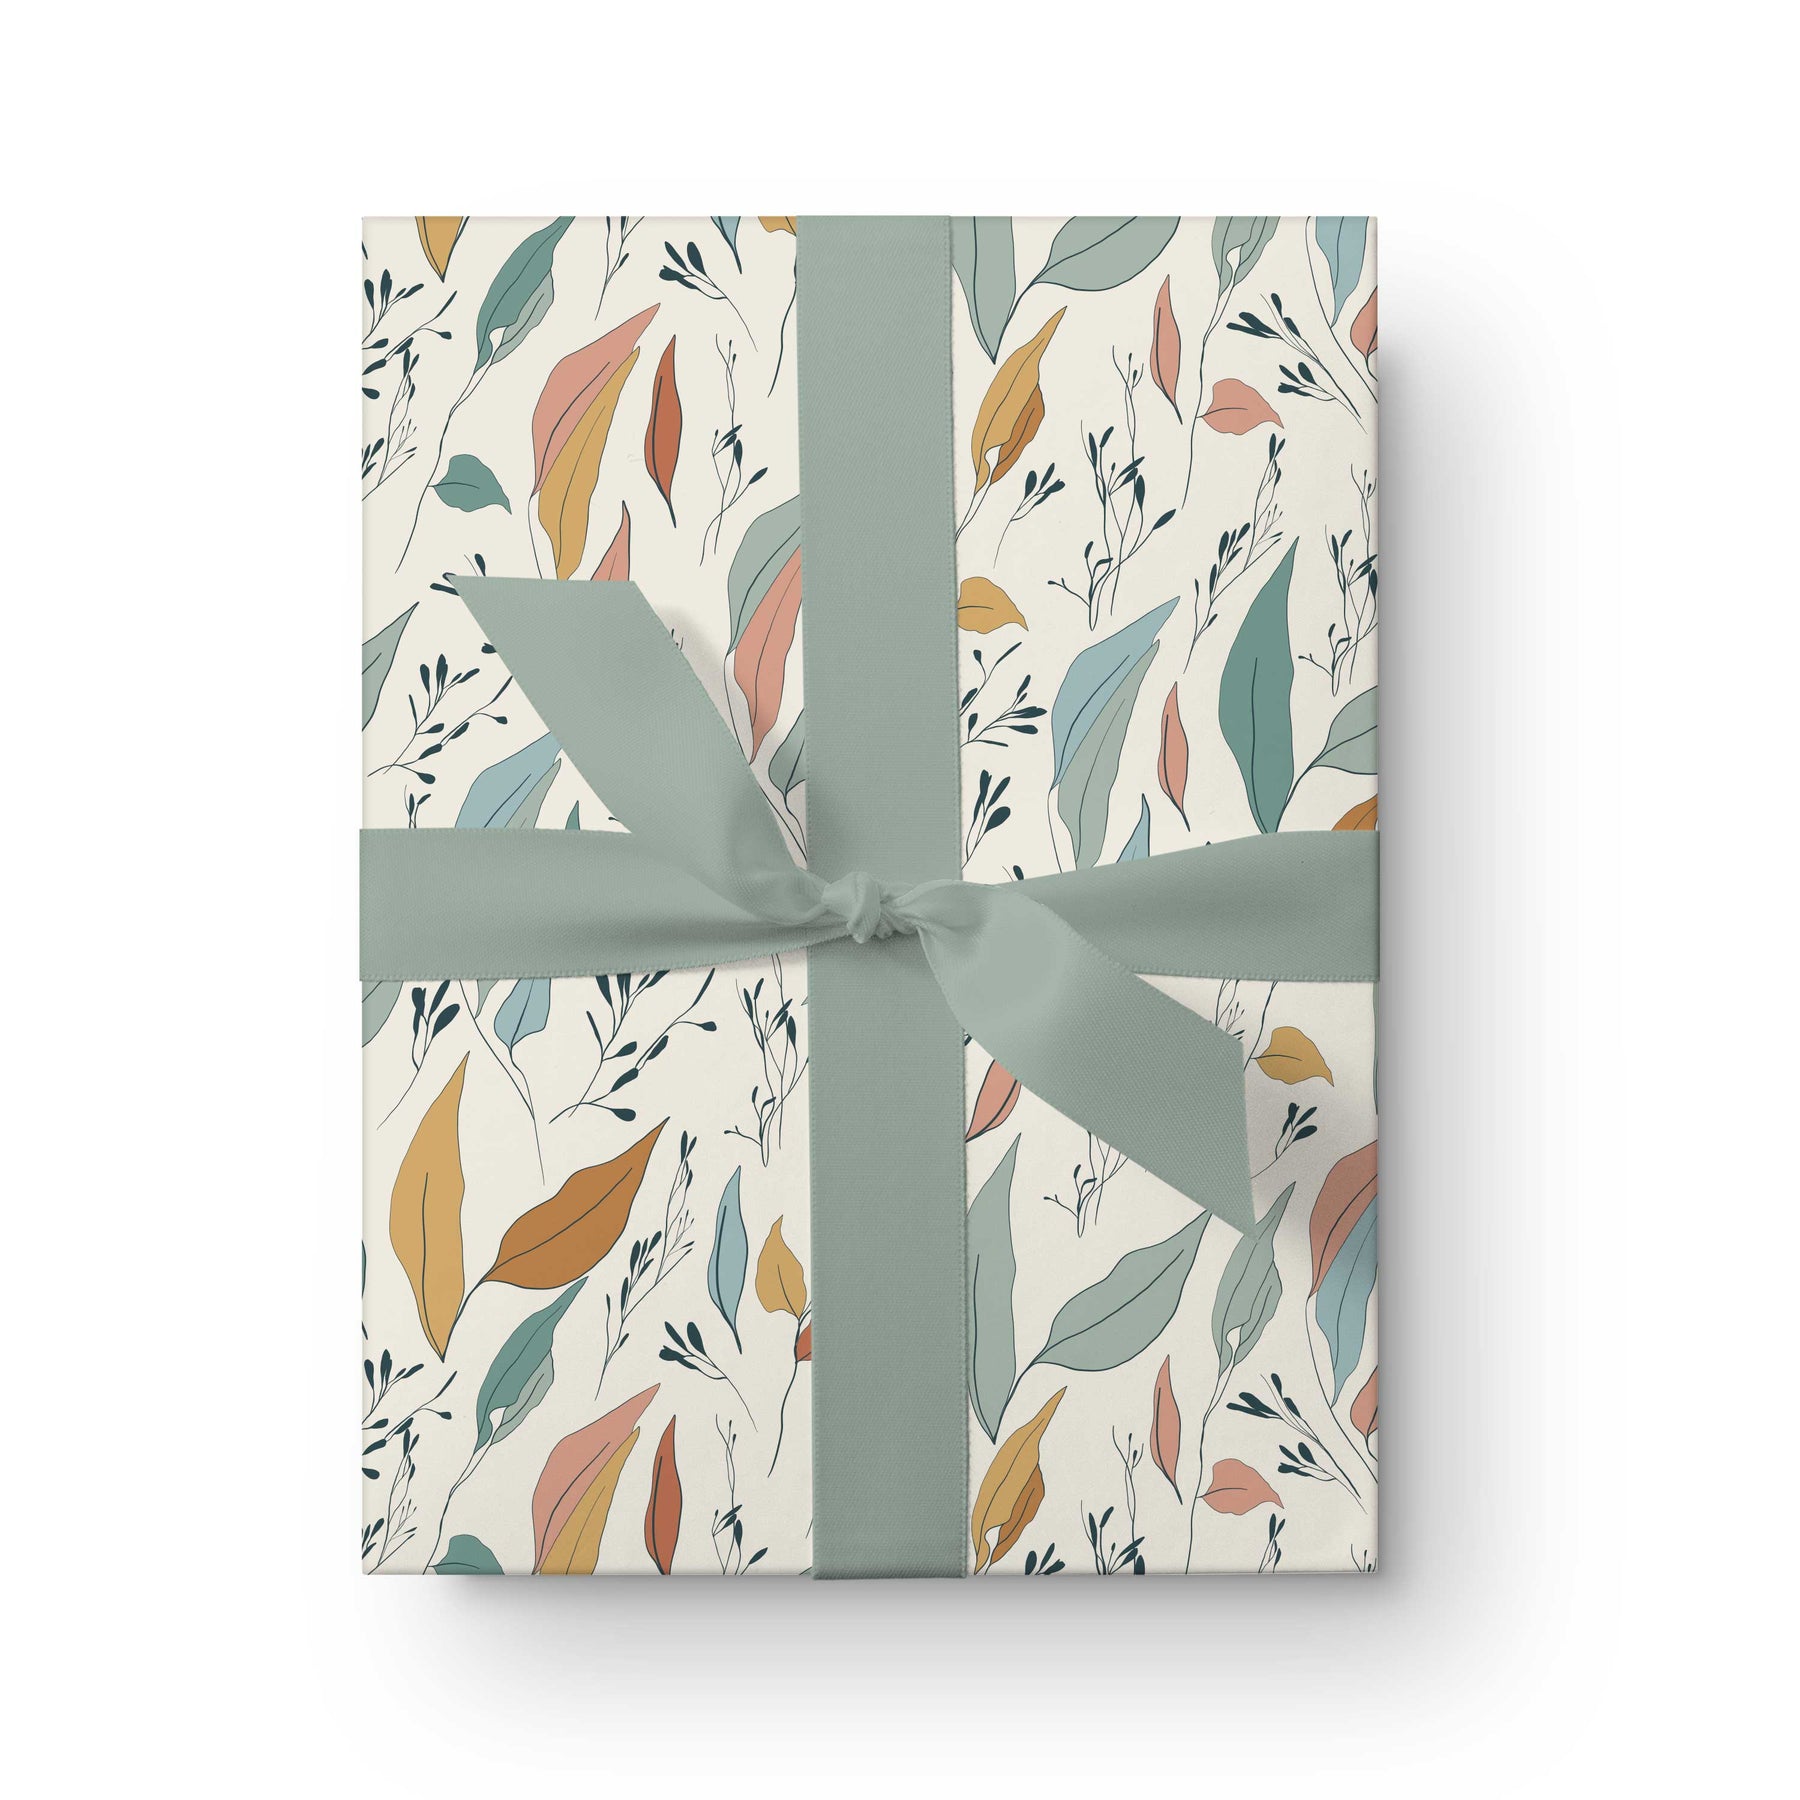 Serenity Flow Leaves Boho Wrapping Paper – Designs by dVa